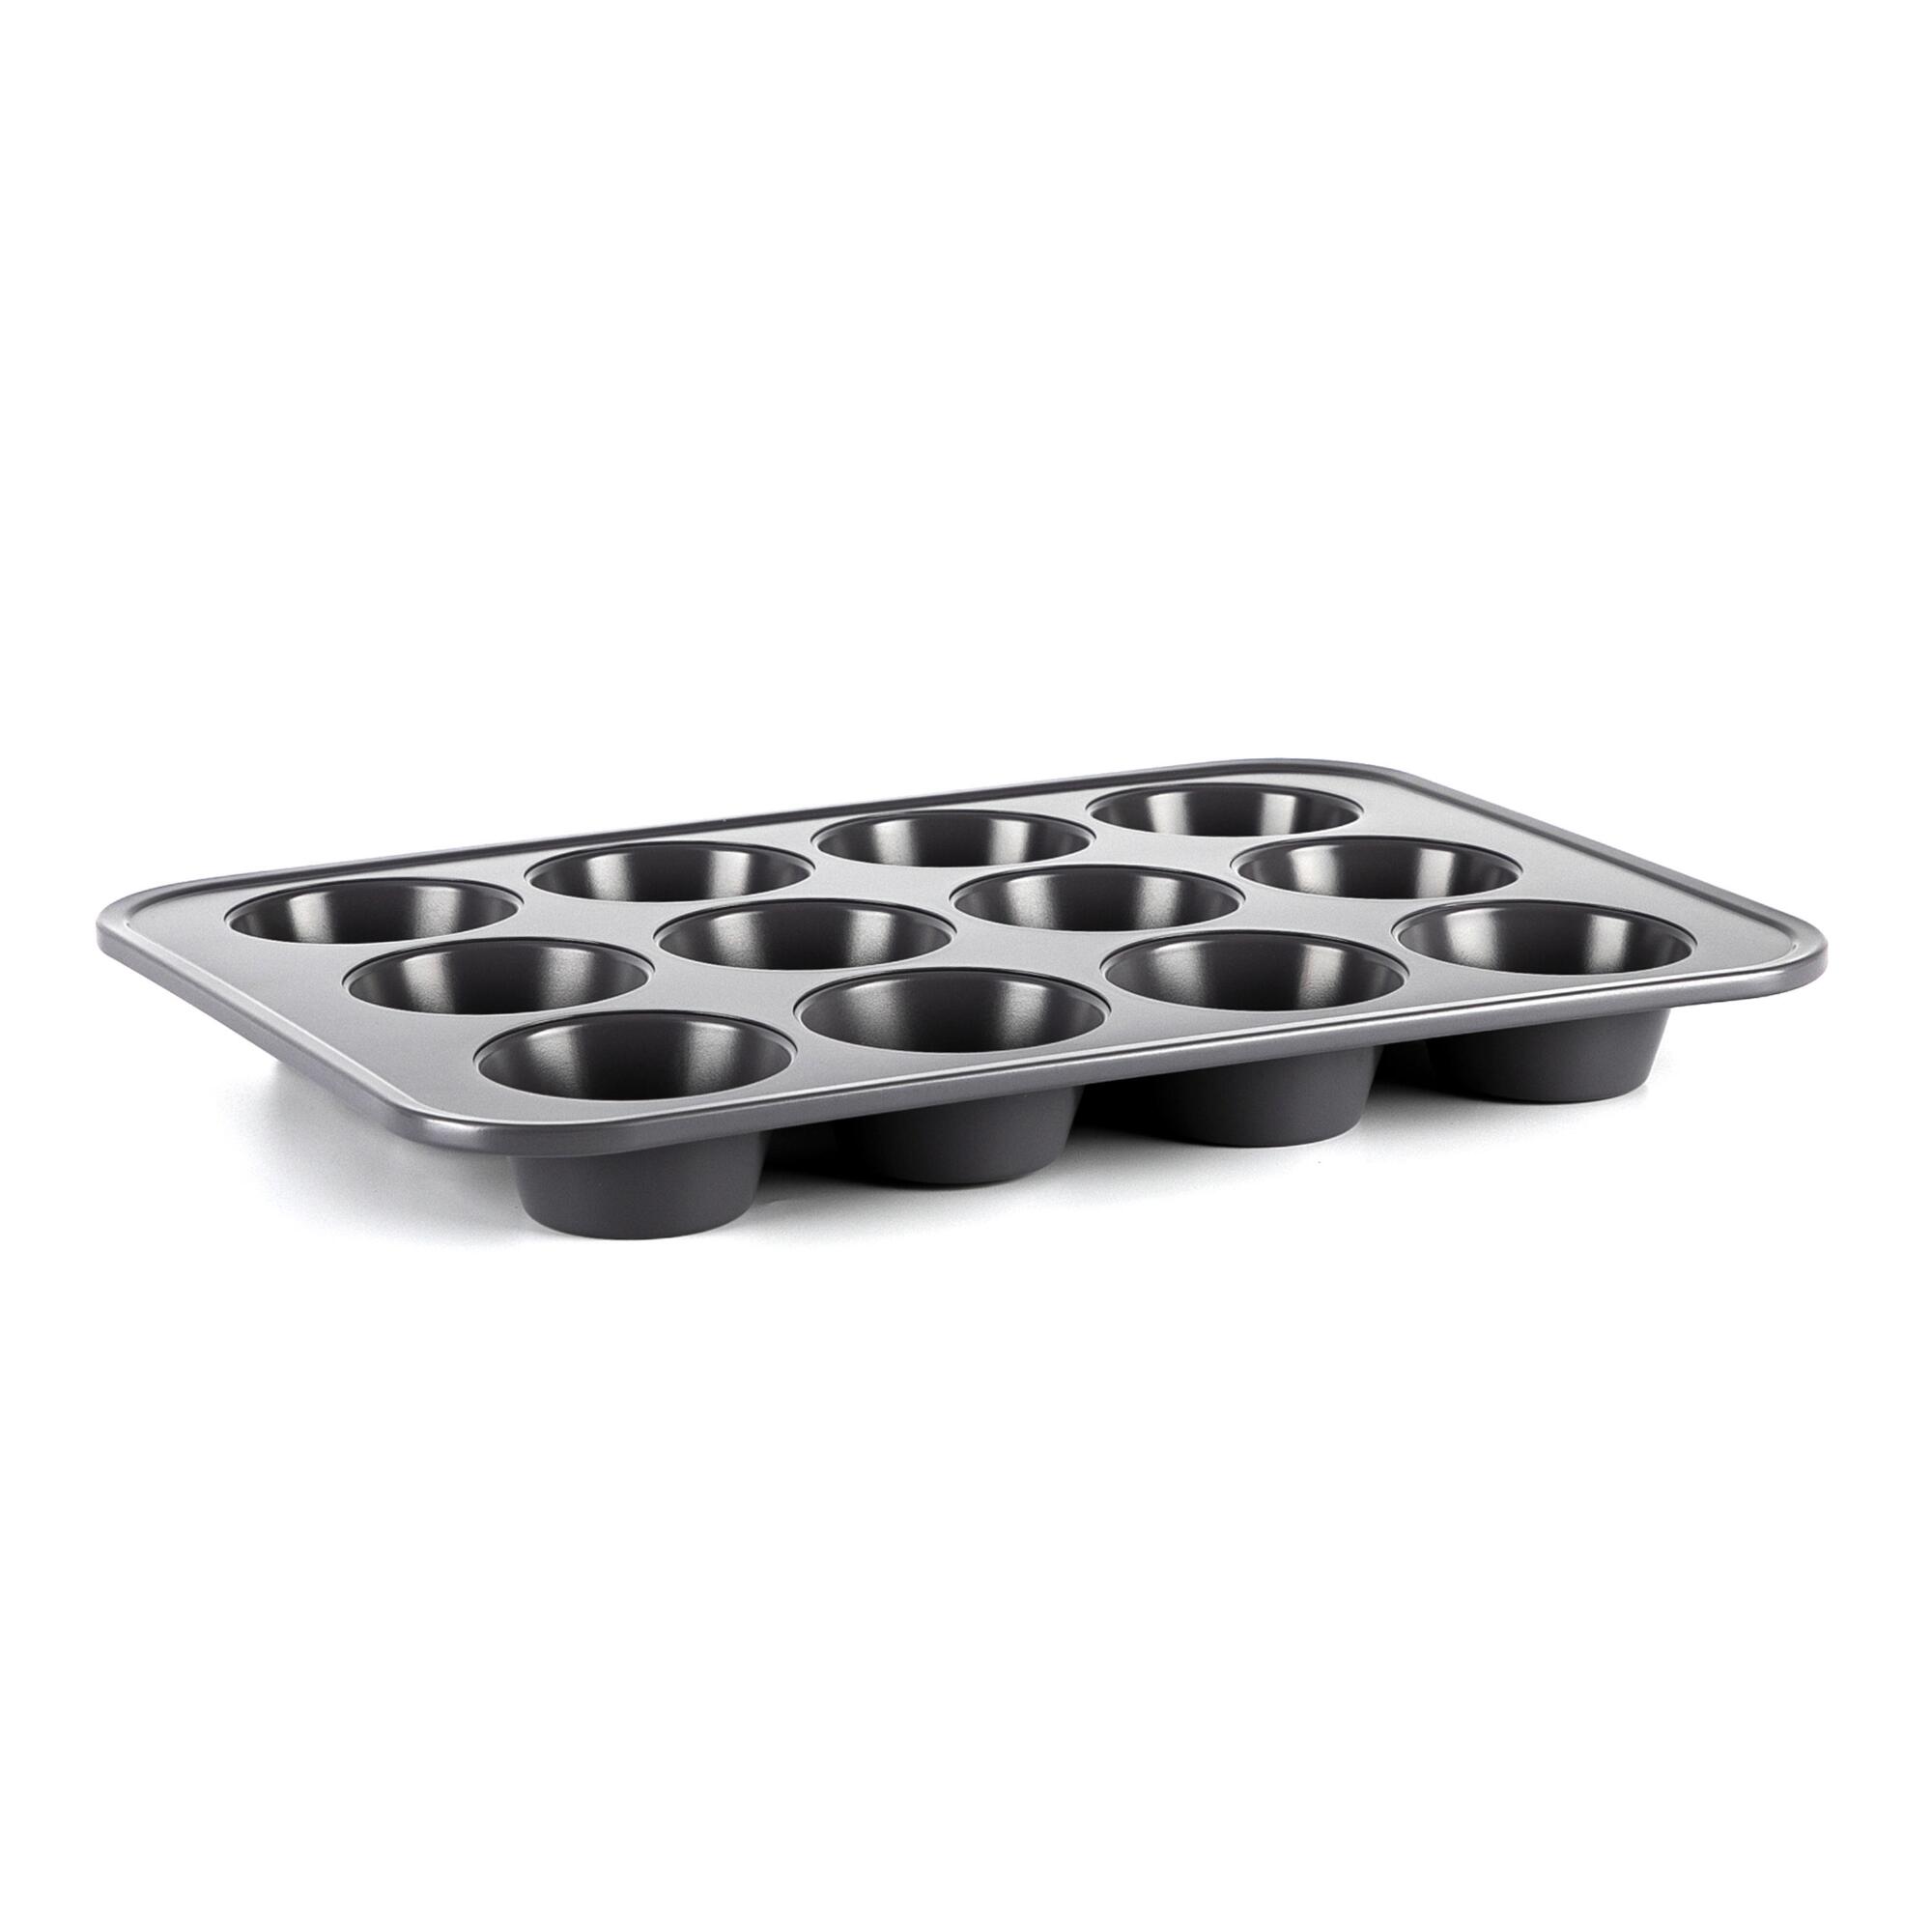 Bakewell Nonstick 12c Muffin Pan by World Market